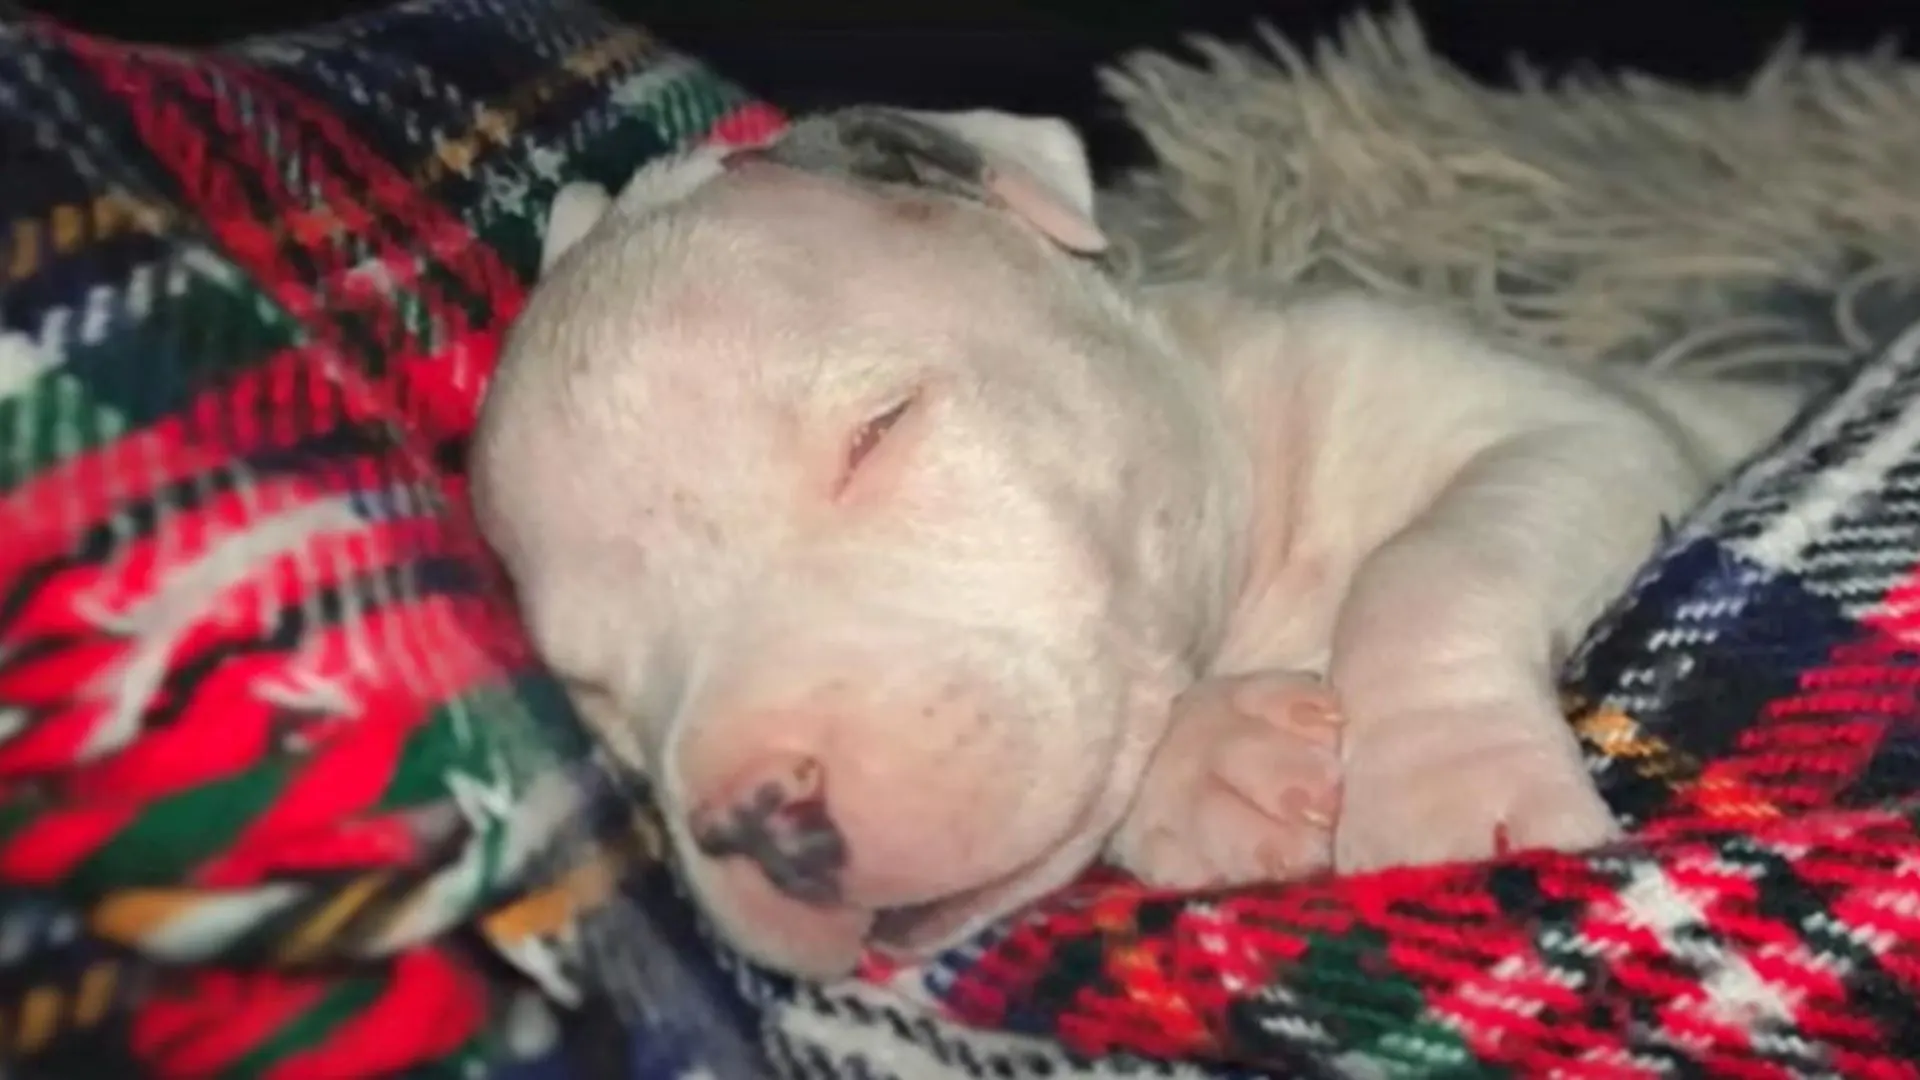 Blind Puppy Was About To Be Euthanized, But Then A Kind-Hearted Man Showed Up